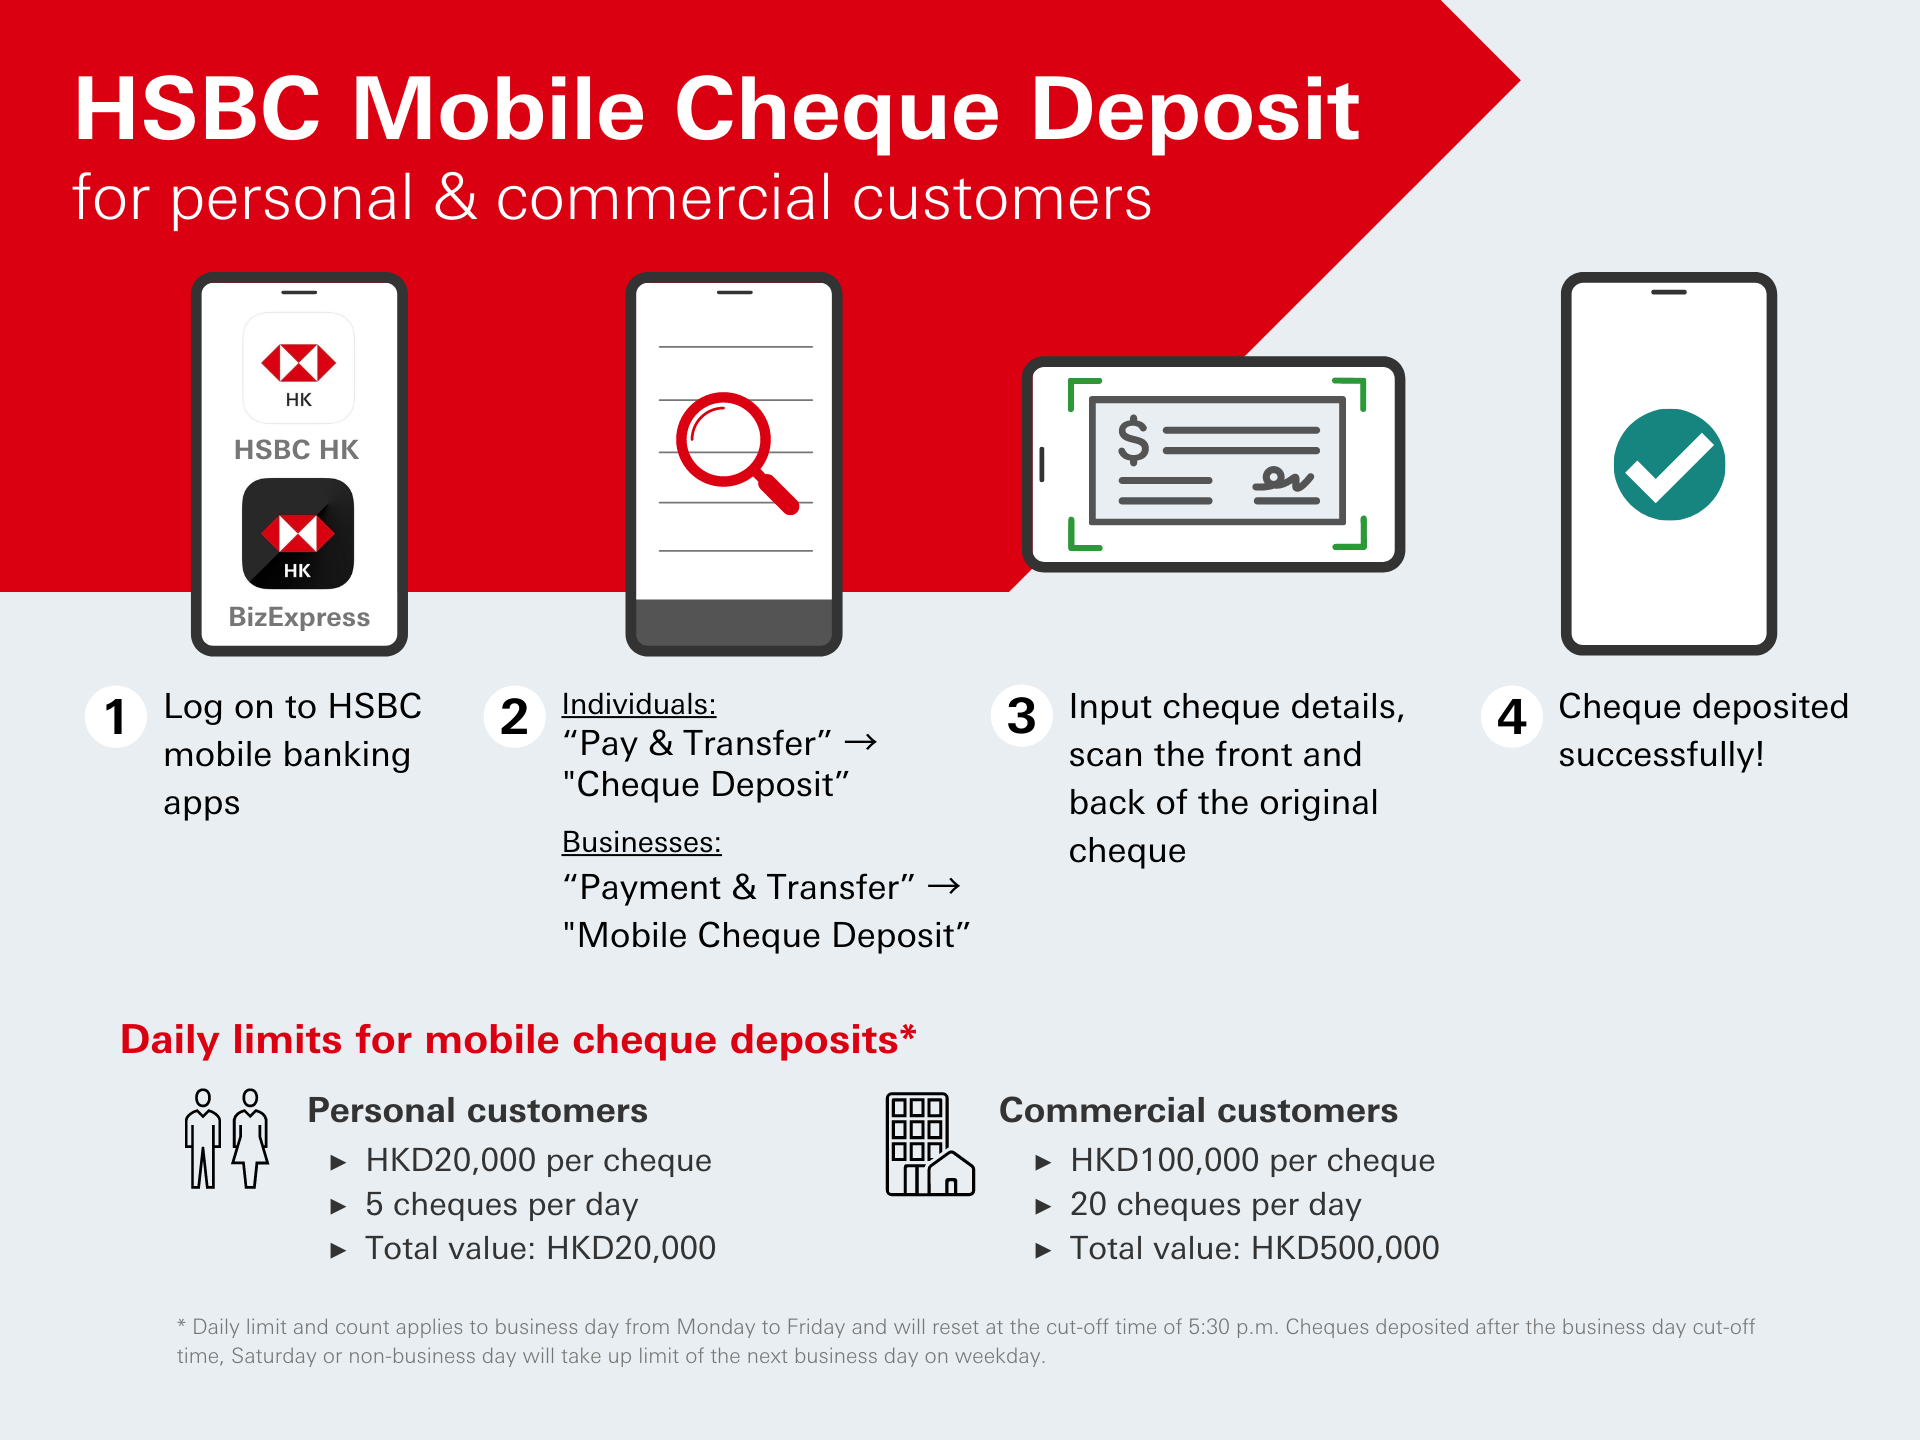 Showing steps to deposit cheque via mobile app. Daily limit is HKD500,000. Up to 20 cheques per day and HKD100,000 per cheque